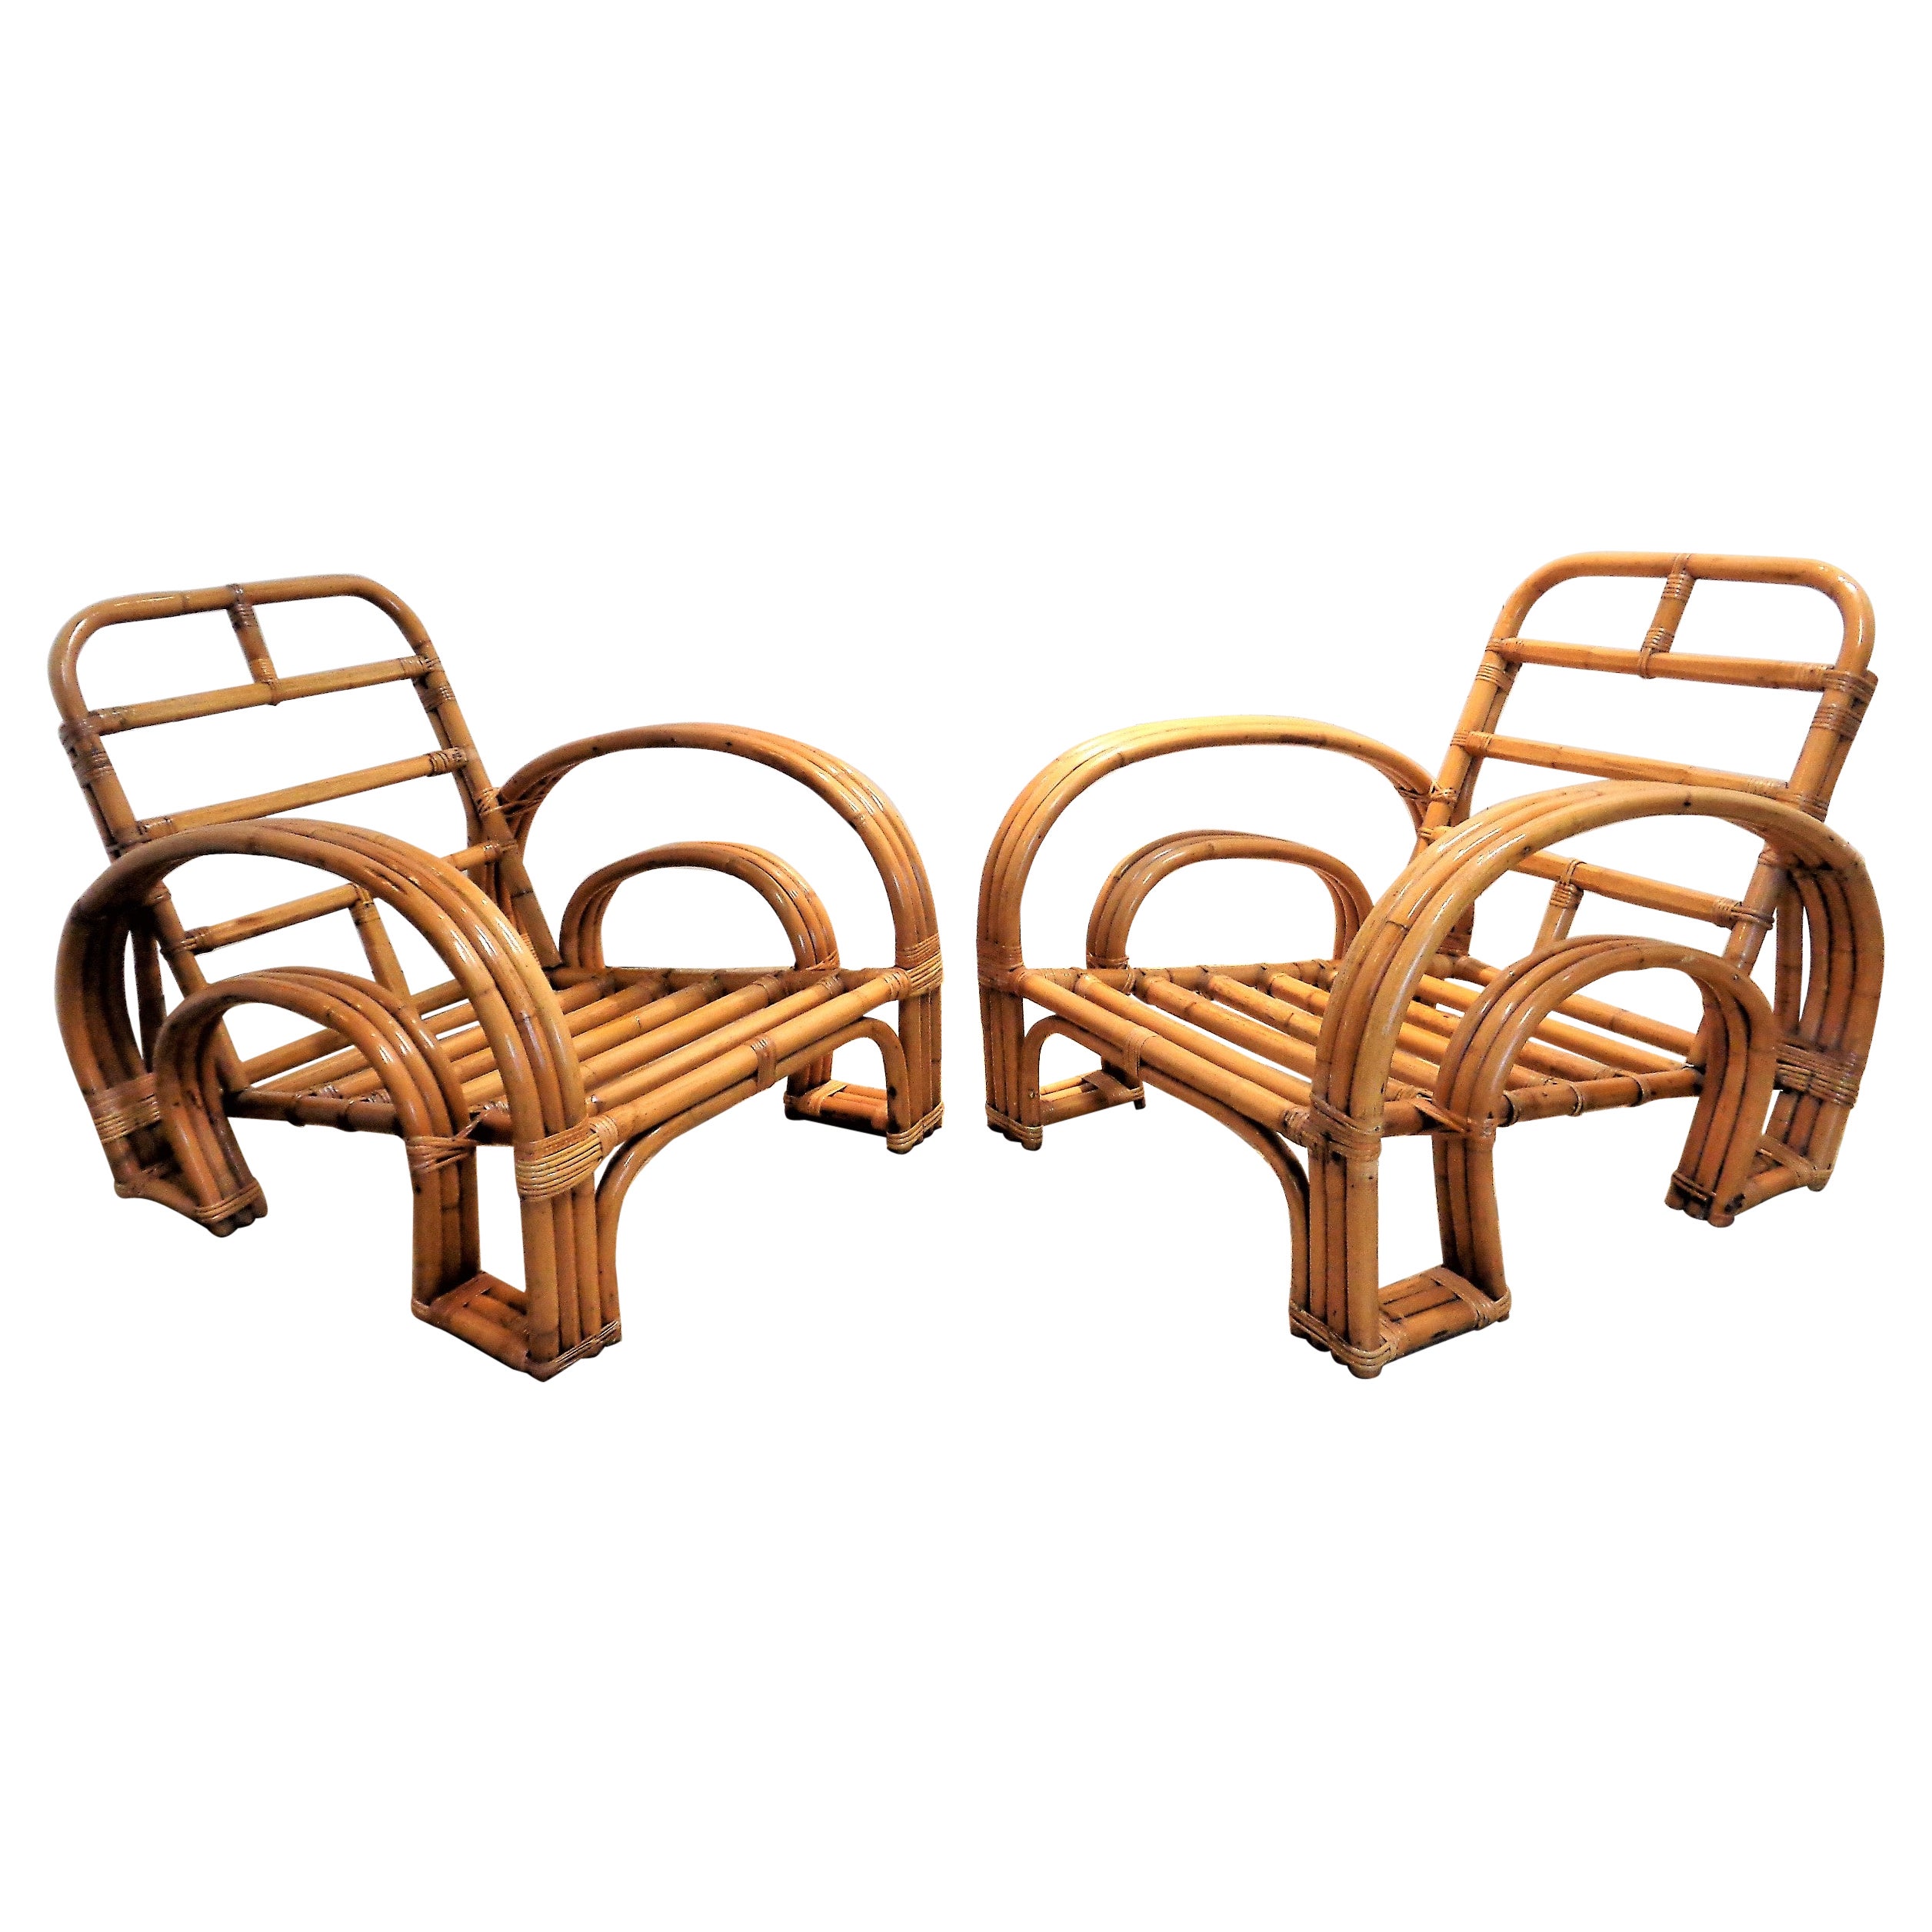  Rattan Double Horseshoe Lounge Chairs For Sale